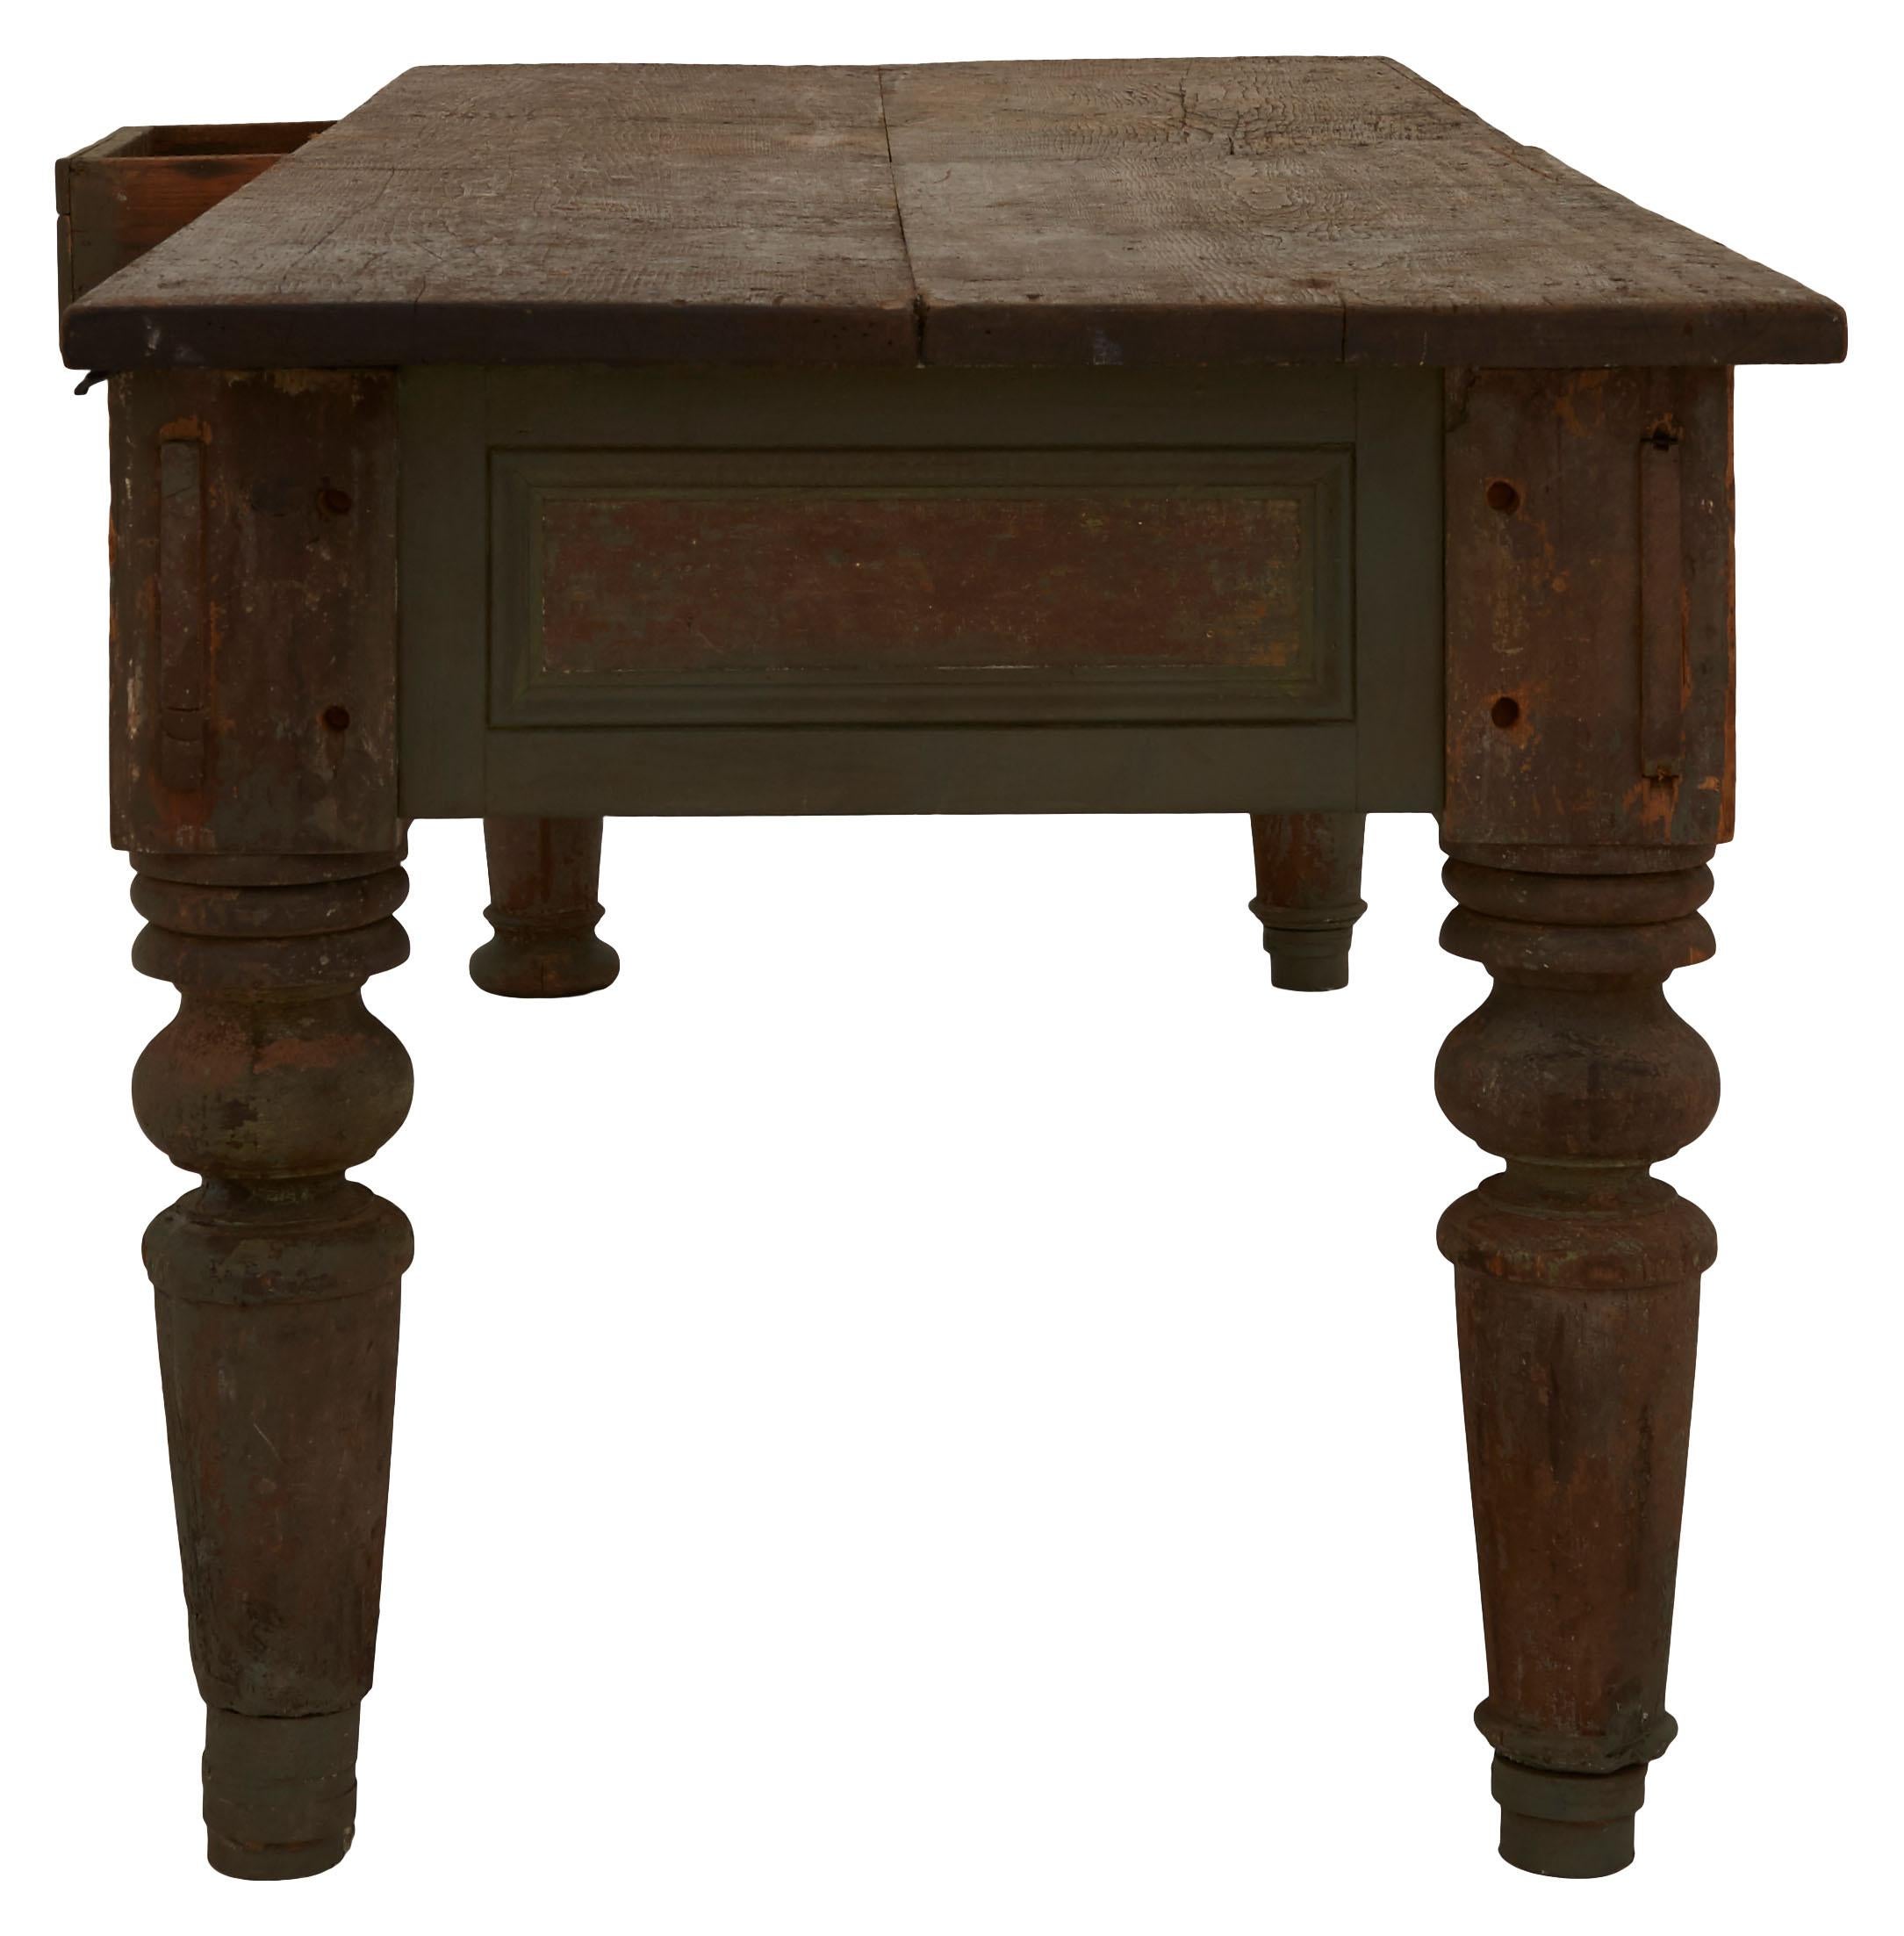 Late 19th Century Painted Wood Farm Table im Zustand „Gut“ im Angebot in Chicago, IL